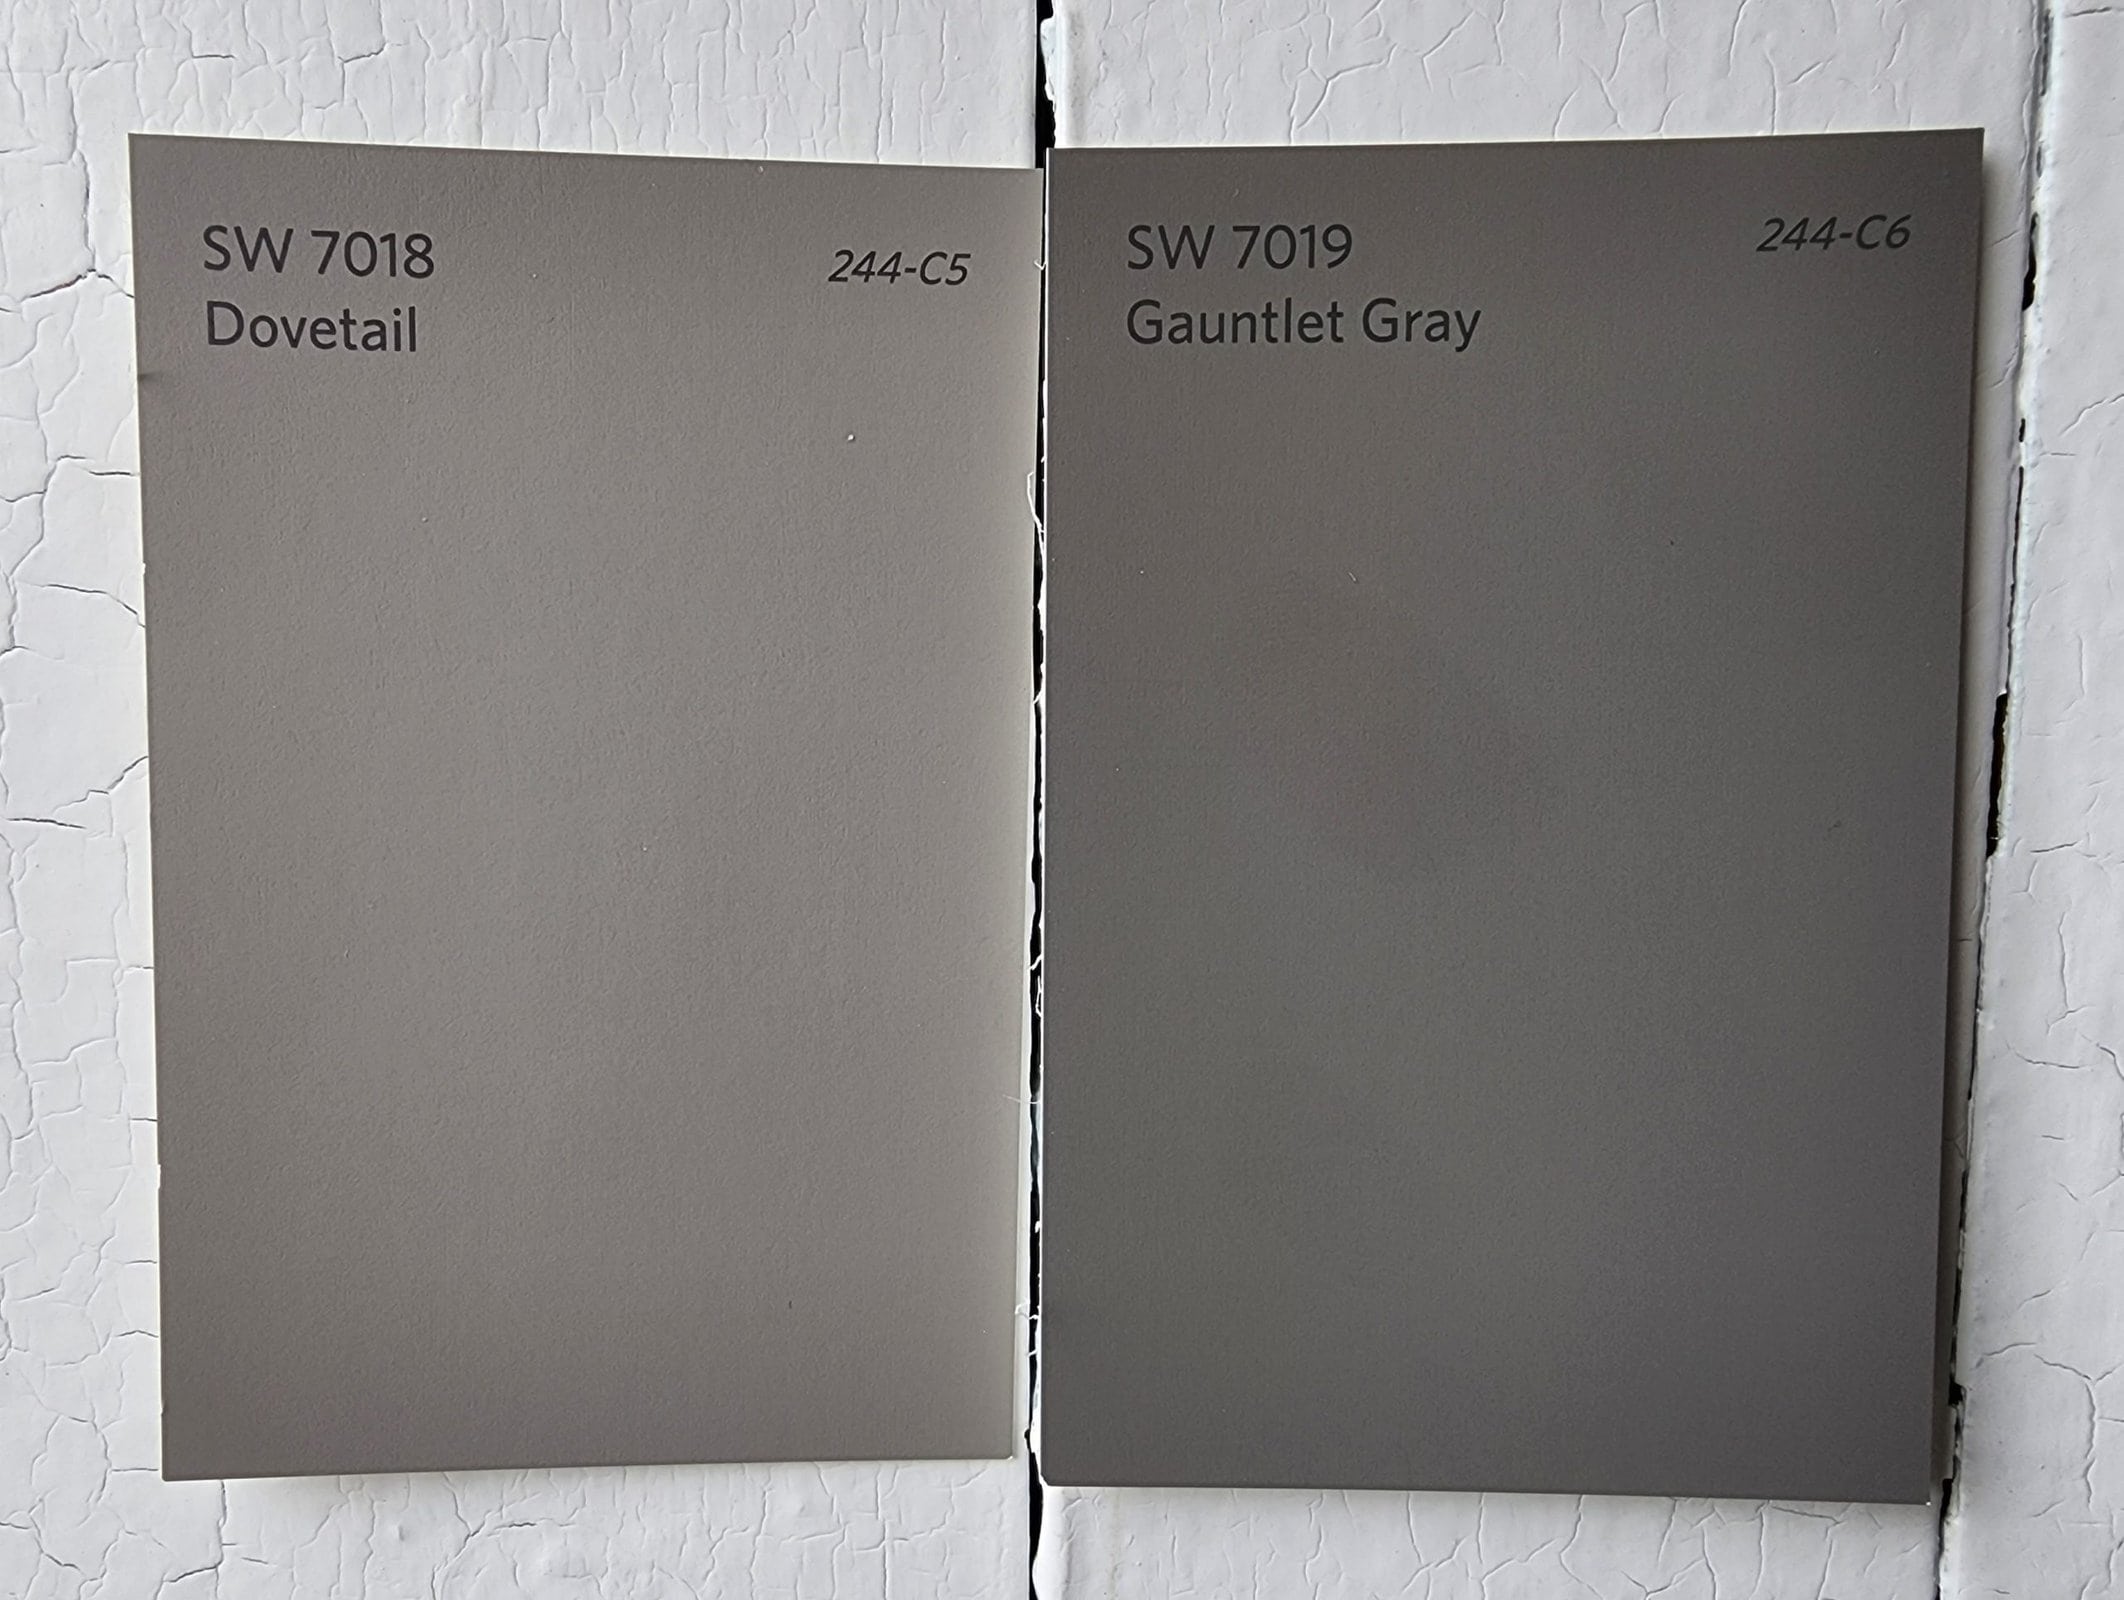  Dovetail vs Gauntlet Gray by Sherwin Williams scaled